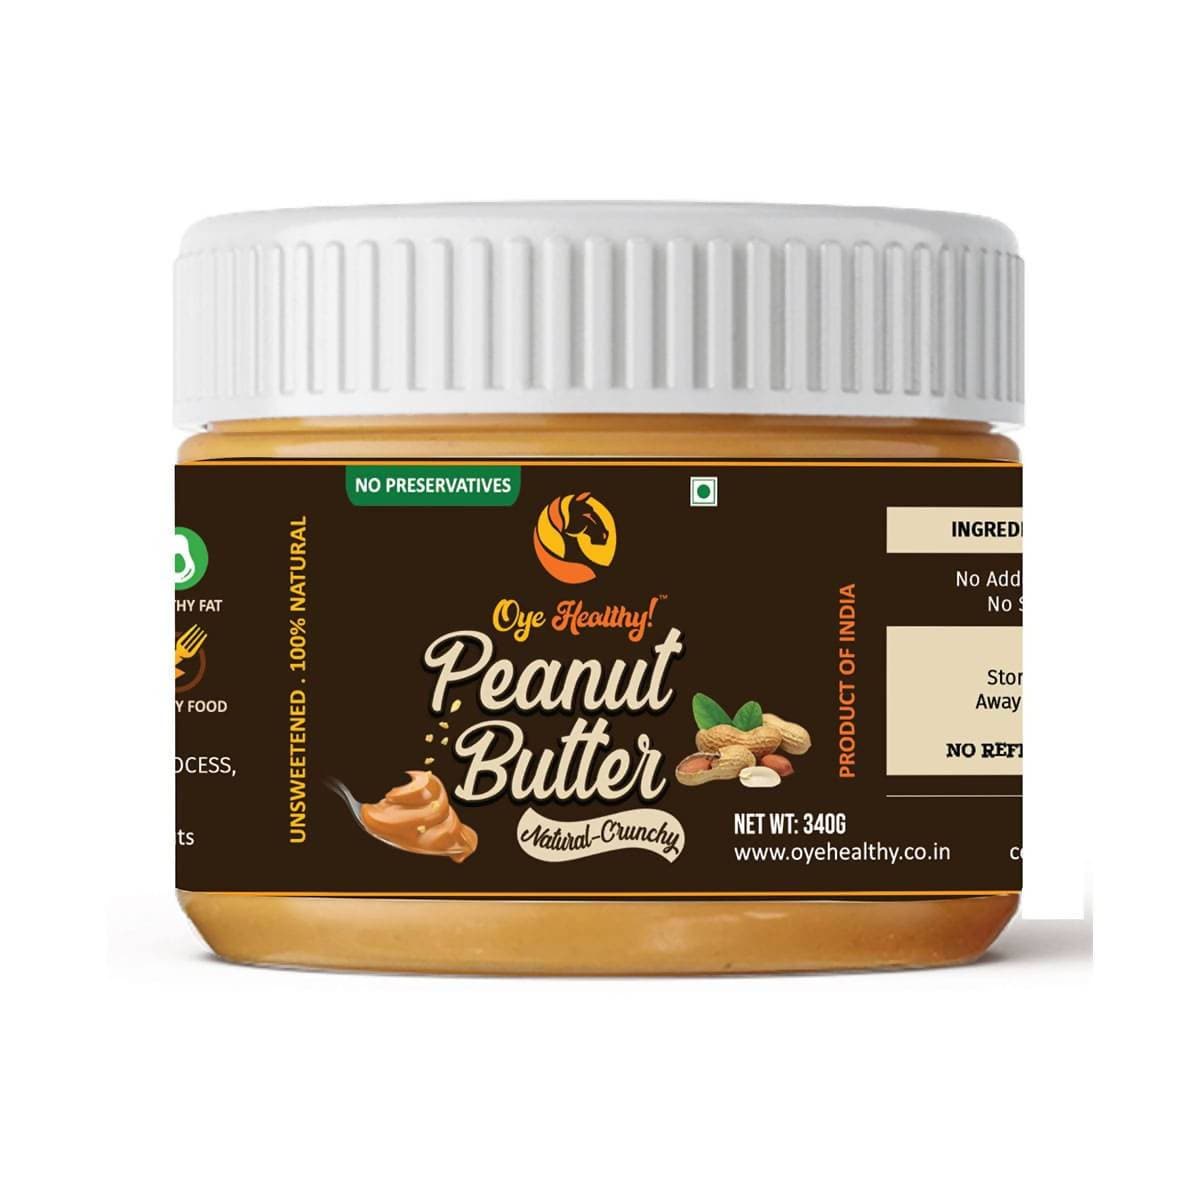 Oye Healthy Peanut Butter Natural Crunchy - Combo Pack of 2 (850gm+340gm)